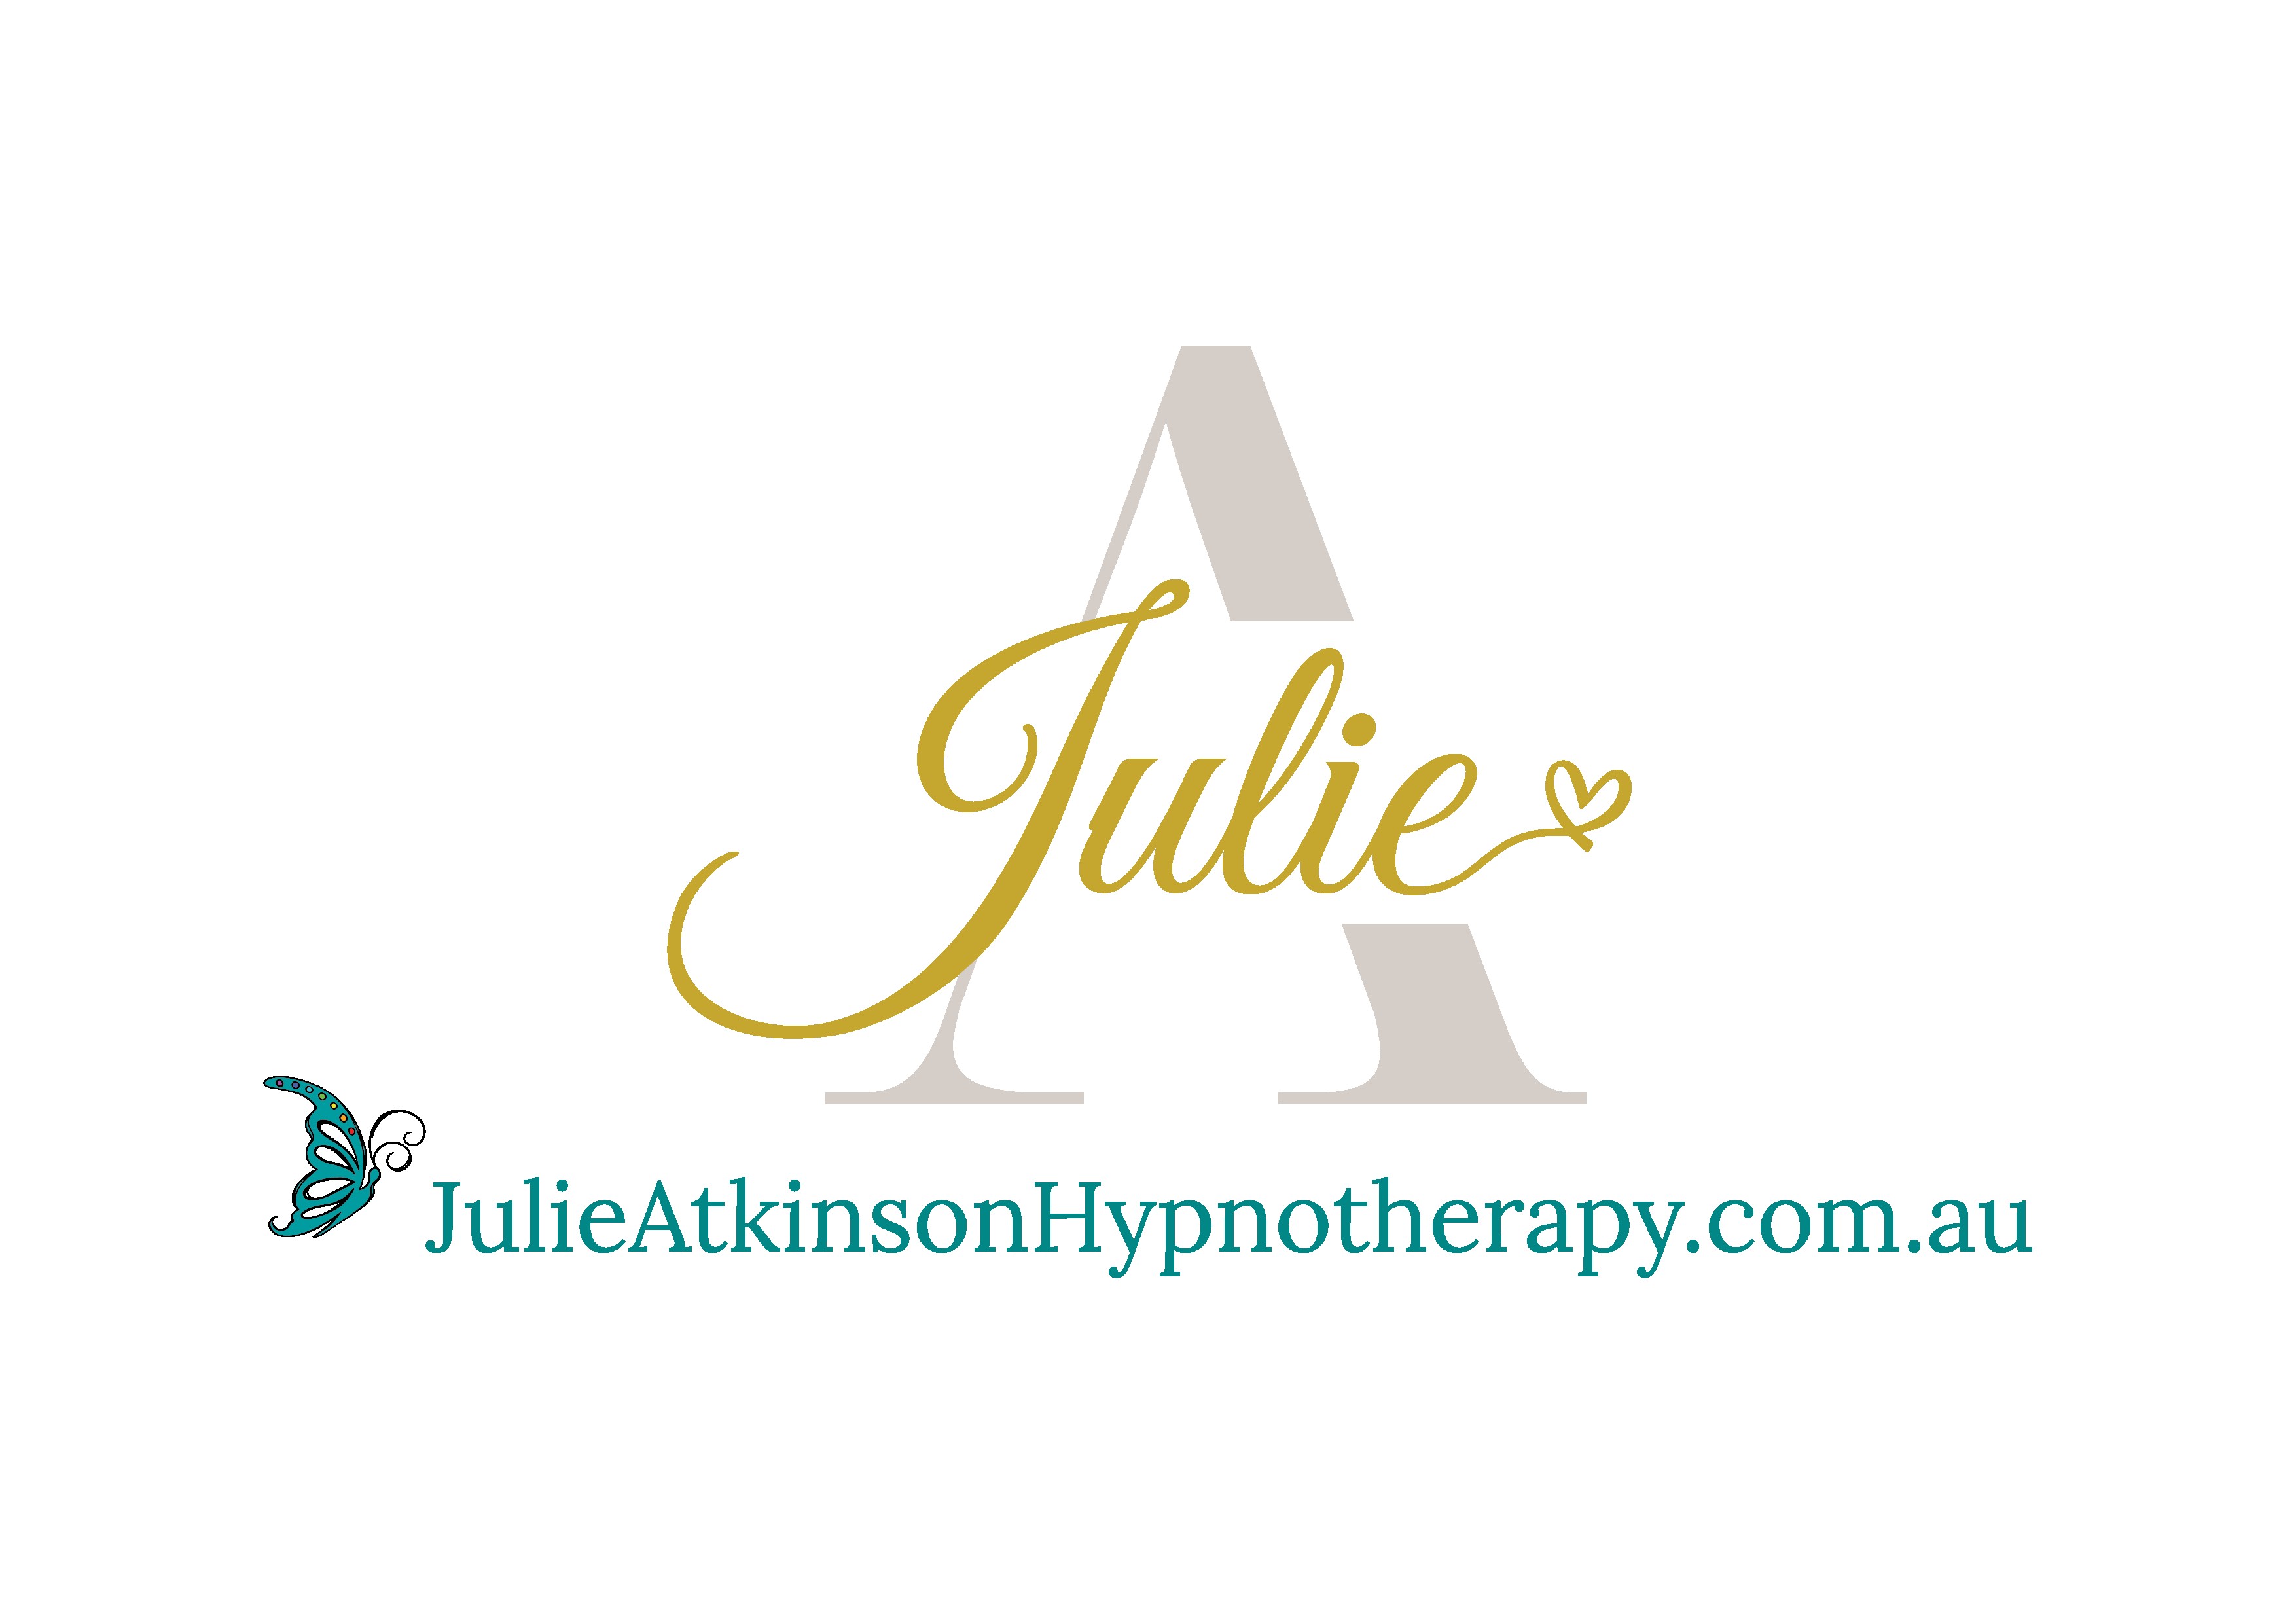 Julie Atkinson therapist on Natural Therapy Pages